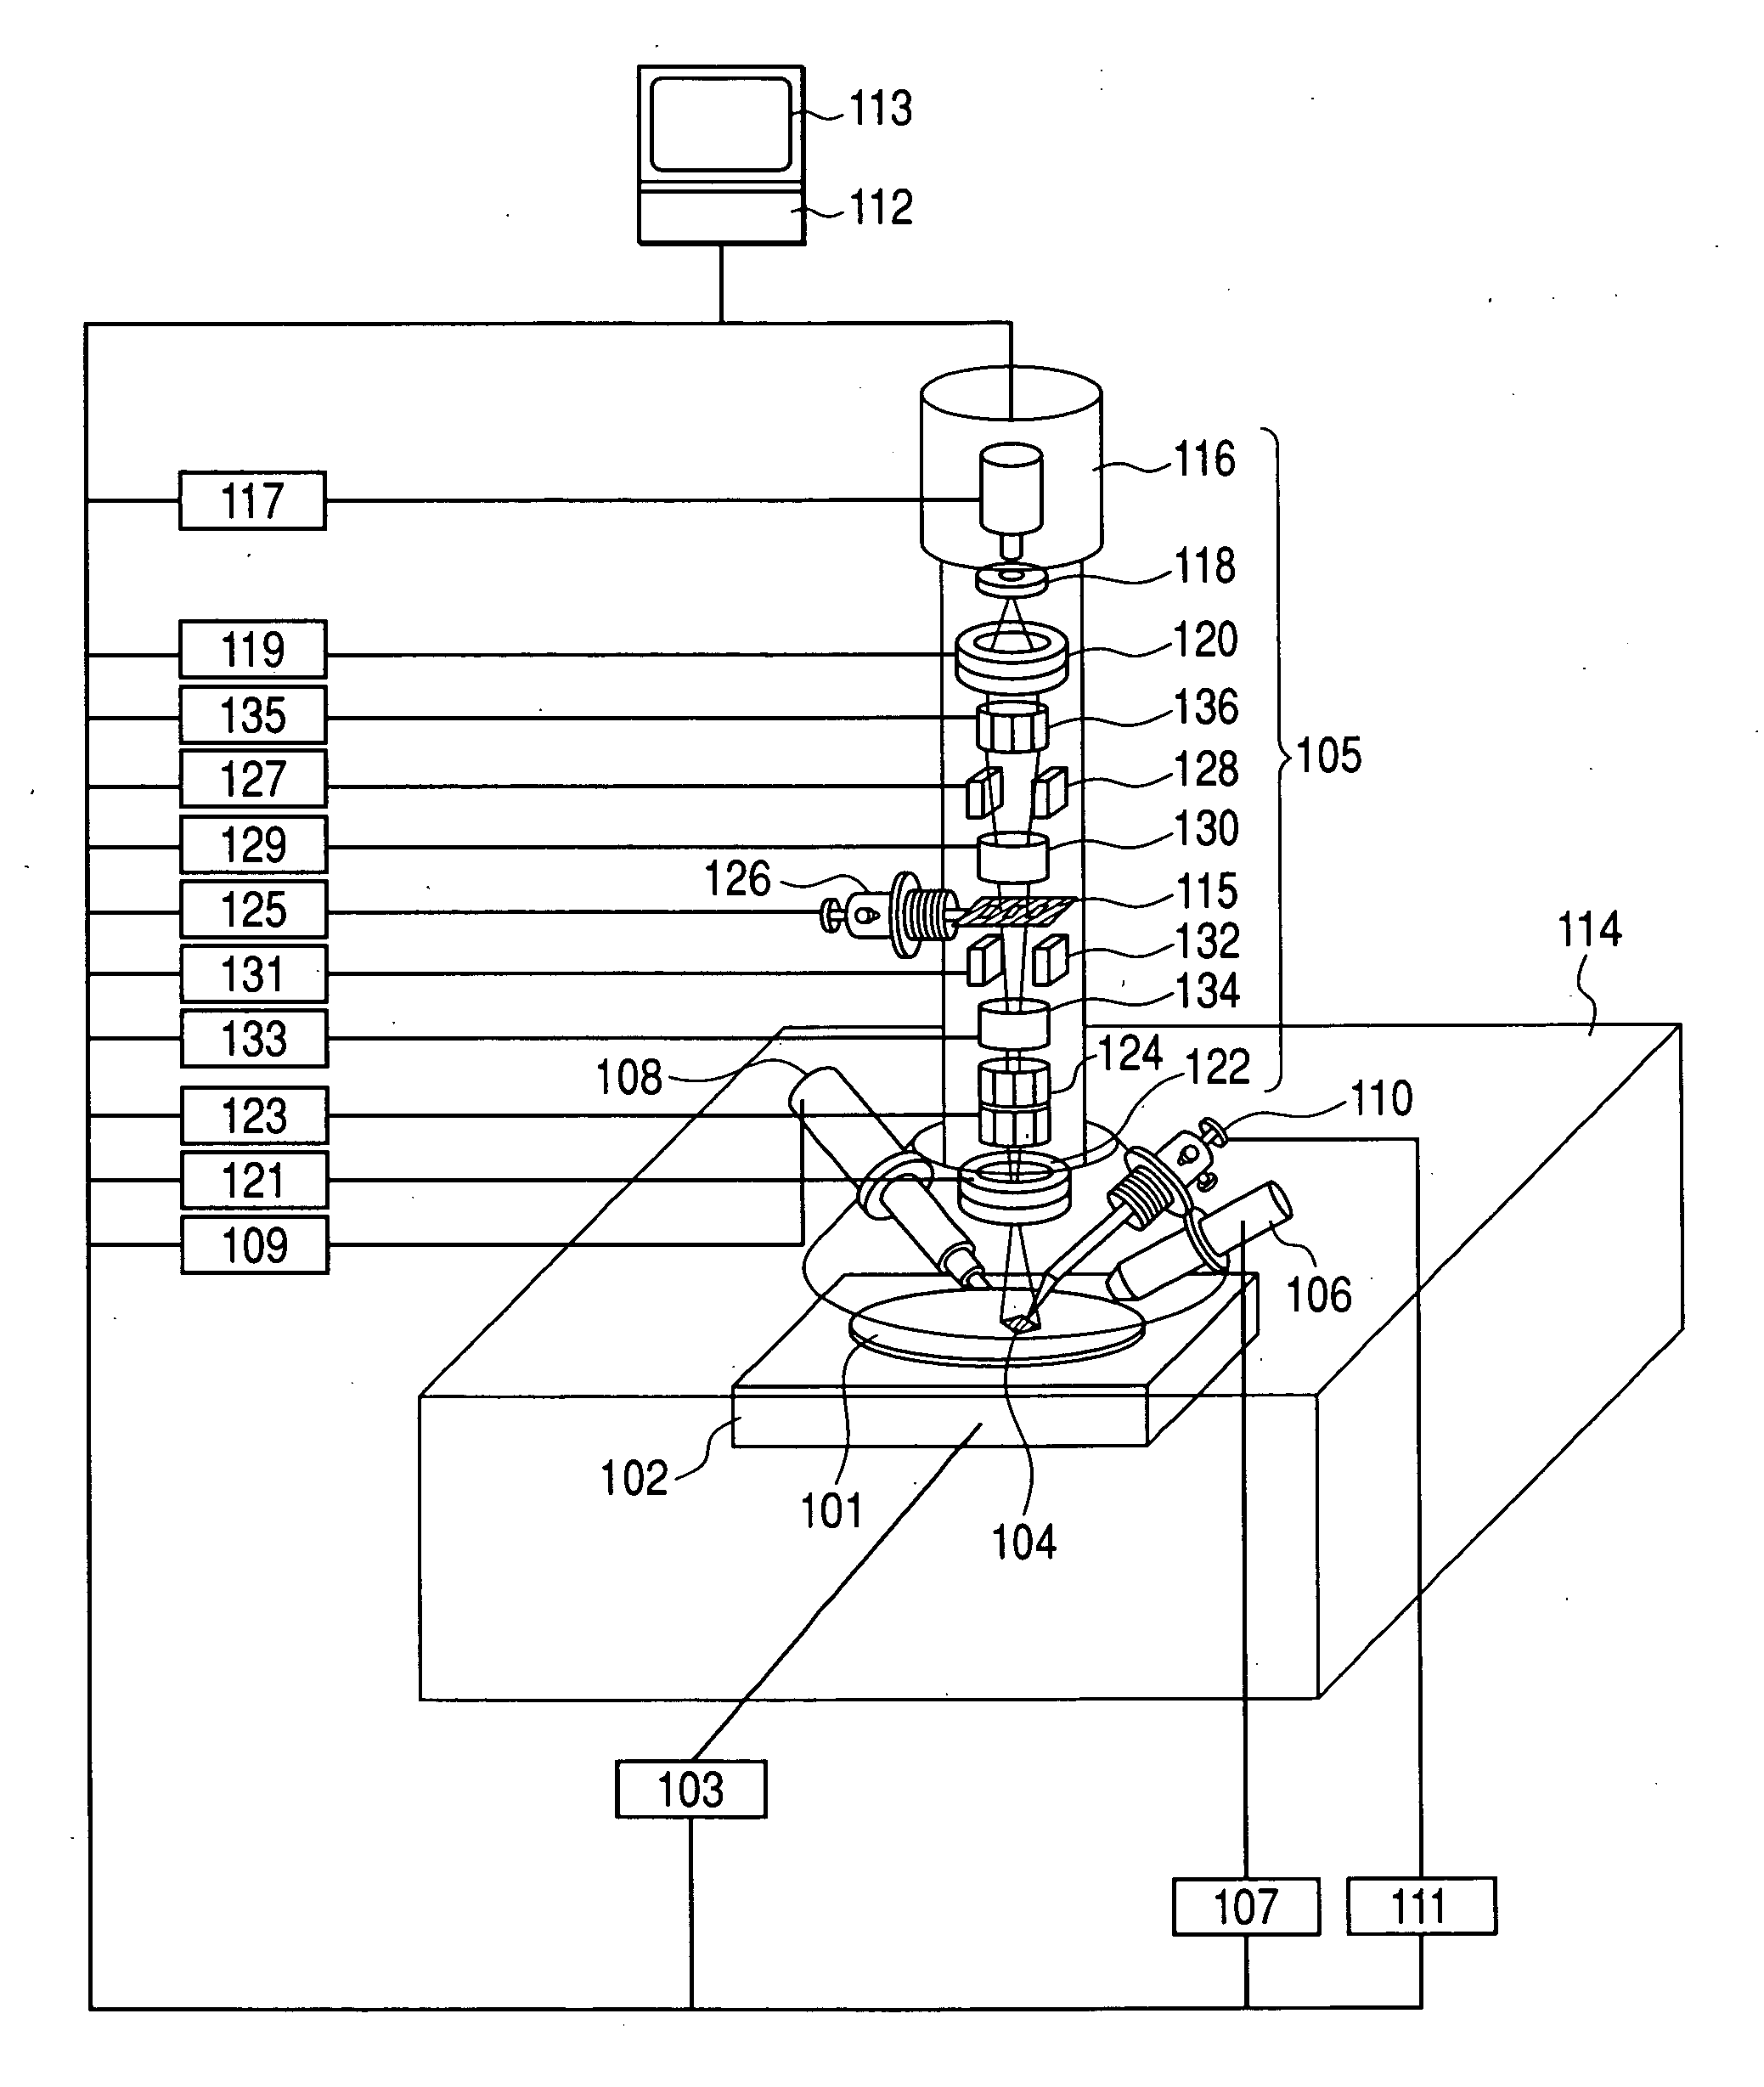 Apparatus for ion beam fabrication